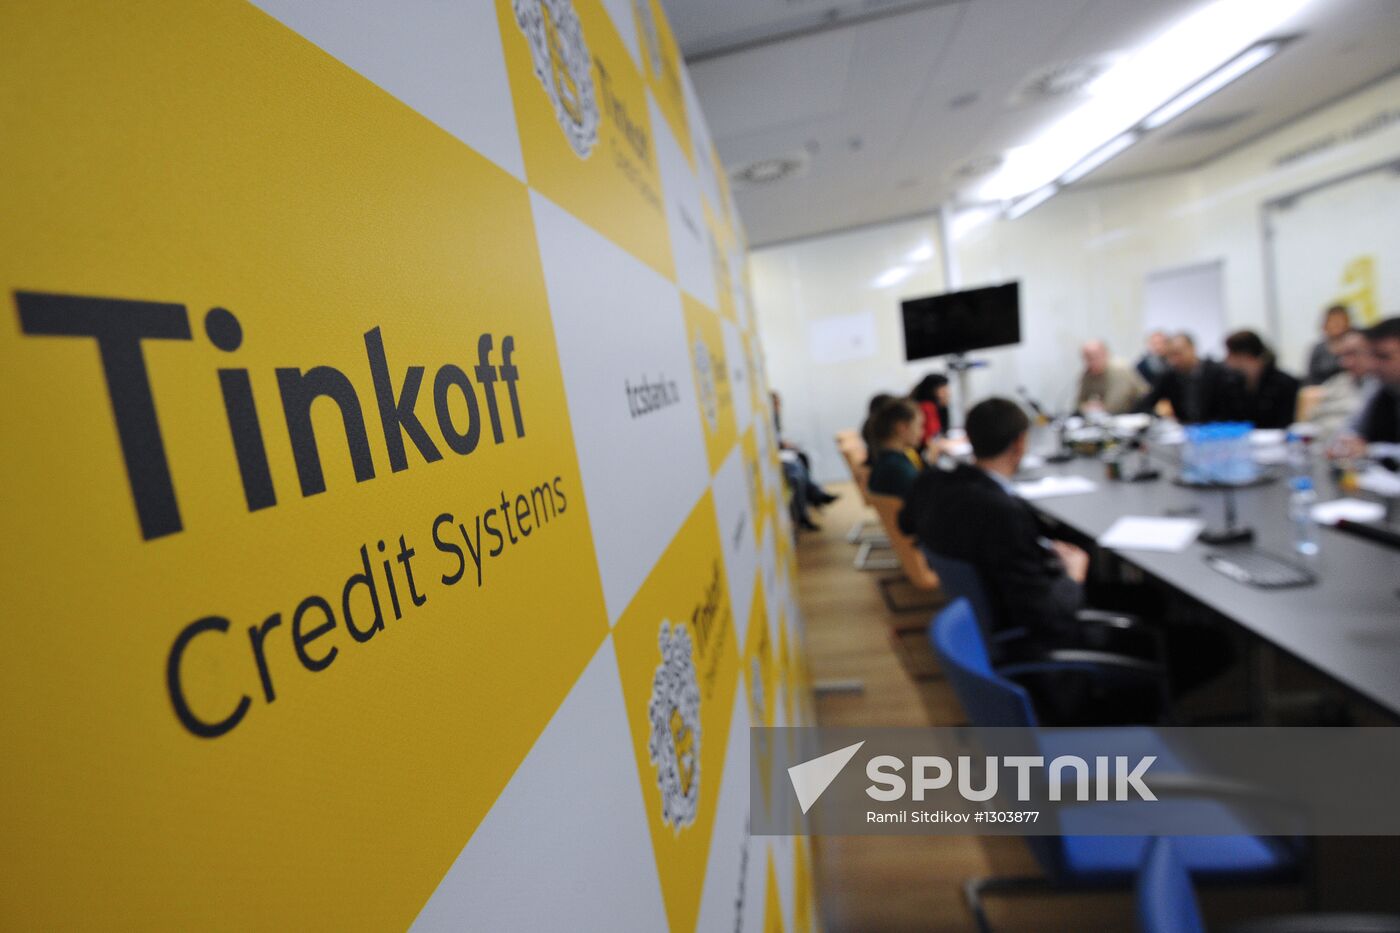 New headquarters of Tinkoff Credit Systems bank in Moscow